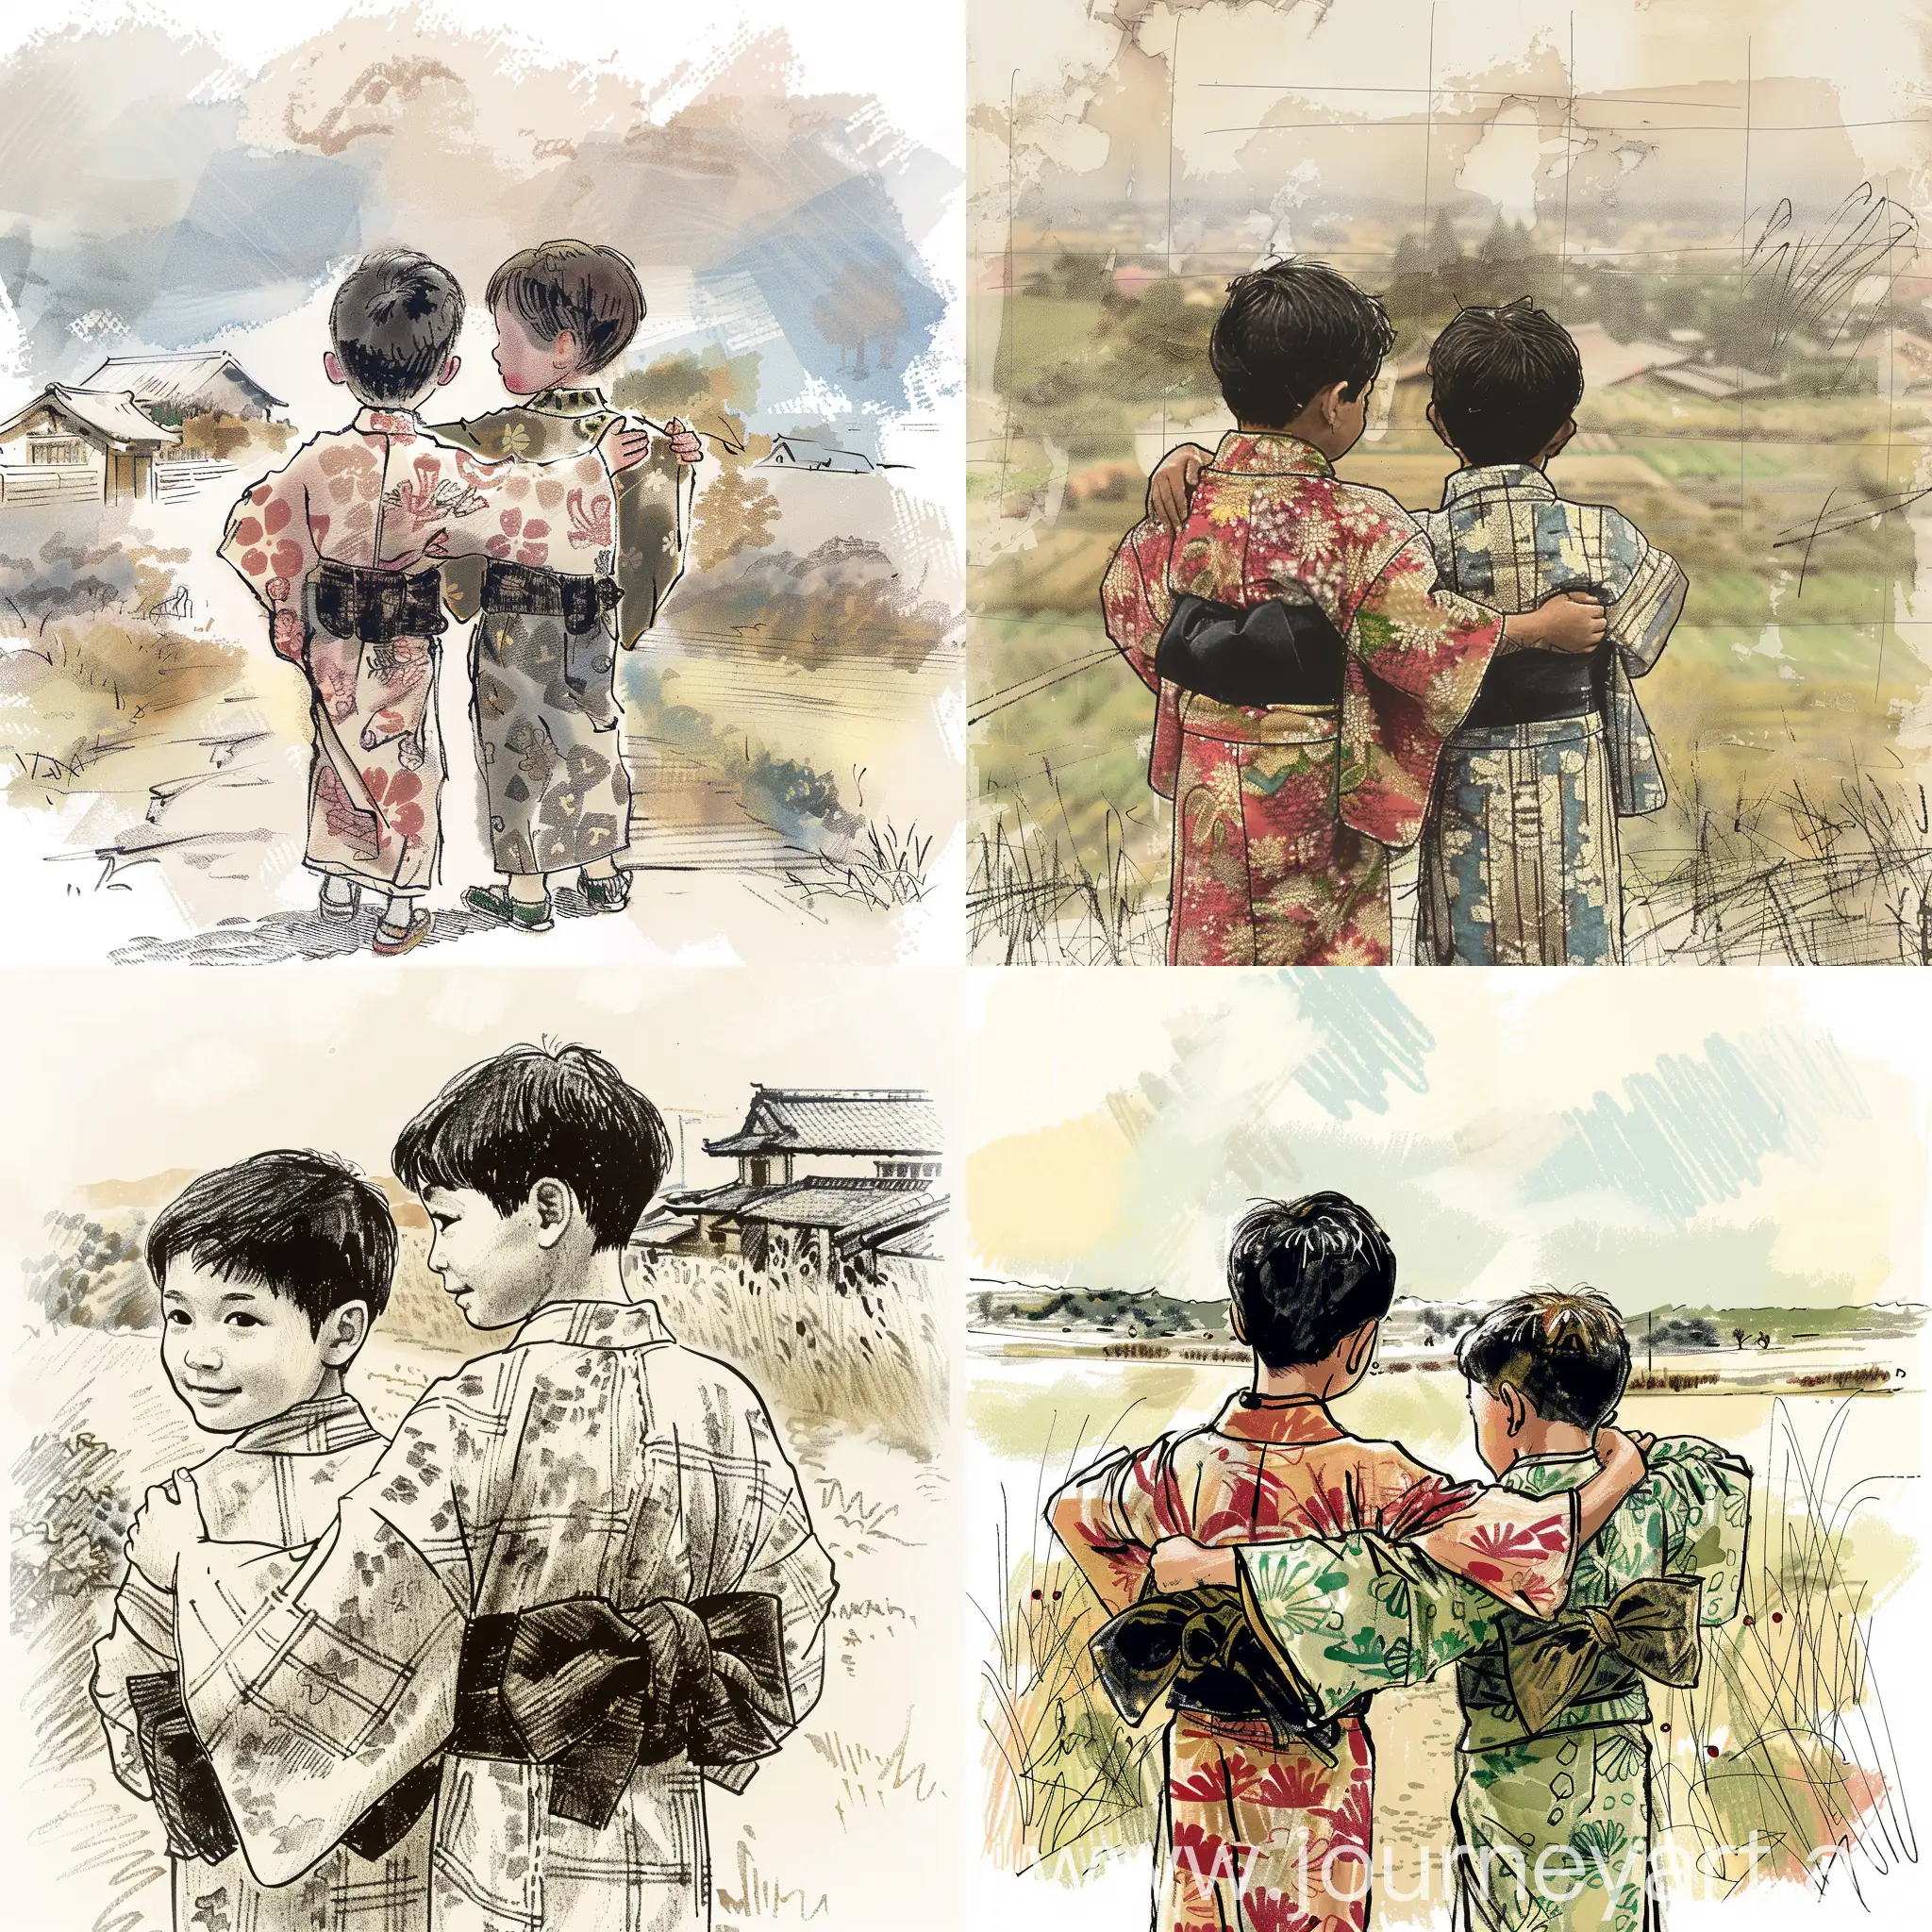 Two boys in kimonos Japanese children look back with their arms around each other's shoulders. Illustrated story Japan has a rich tradition of storytelling and whimsical illustrations. Create a collaborative story that incorporates elements of these artistic styles. A turbulent past and the tenacious spirit of the Japanese people. A patriotic Japan in a DVD still from the 1930 film directed by Shunso Hishida. Preschooler's drawing, naive and free touch with crayon scribbles, hand drawn, single line scribbles, blur of Japanese countryside in the background.